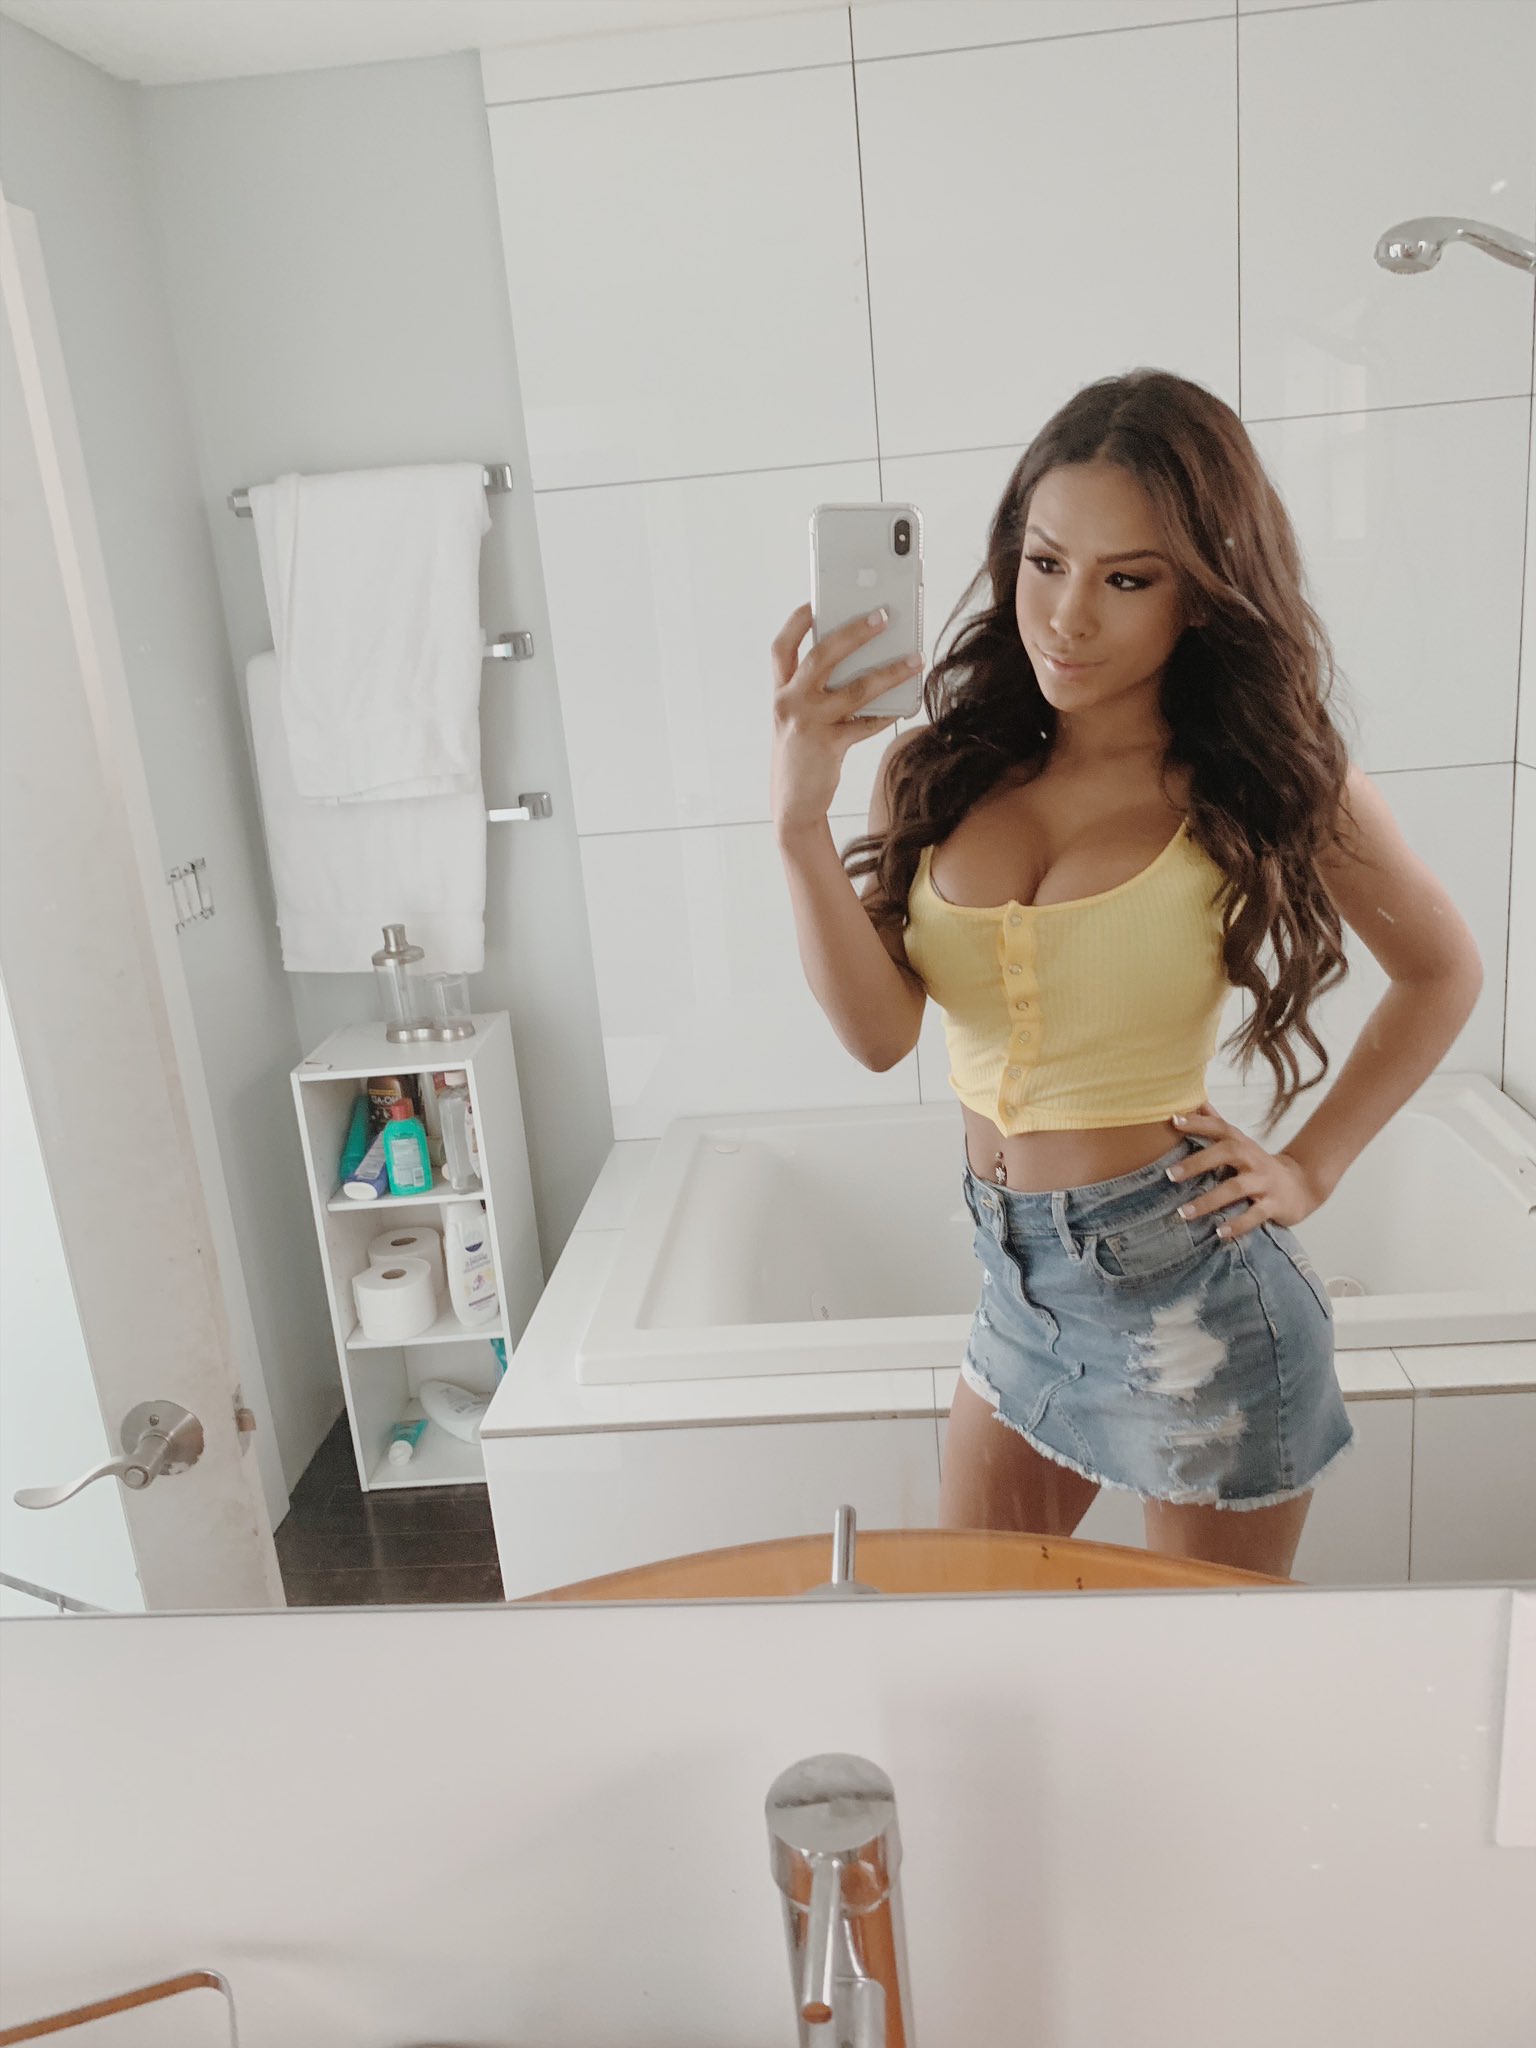 Sexy porn star Autumn Falls taking a mirror selfie in a bathroom wearing a tight pink shirt and a jean skirt.